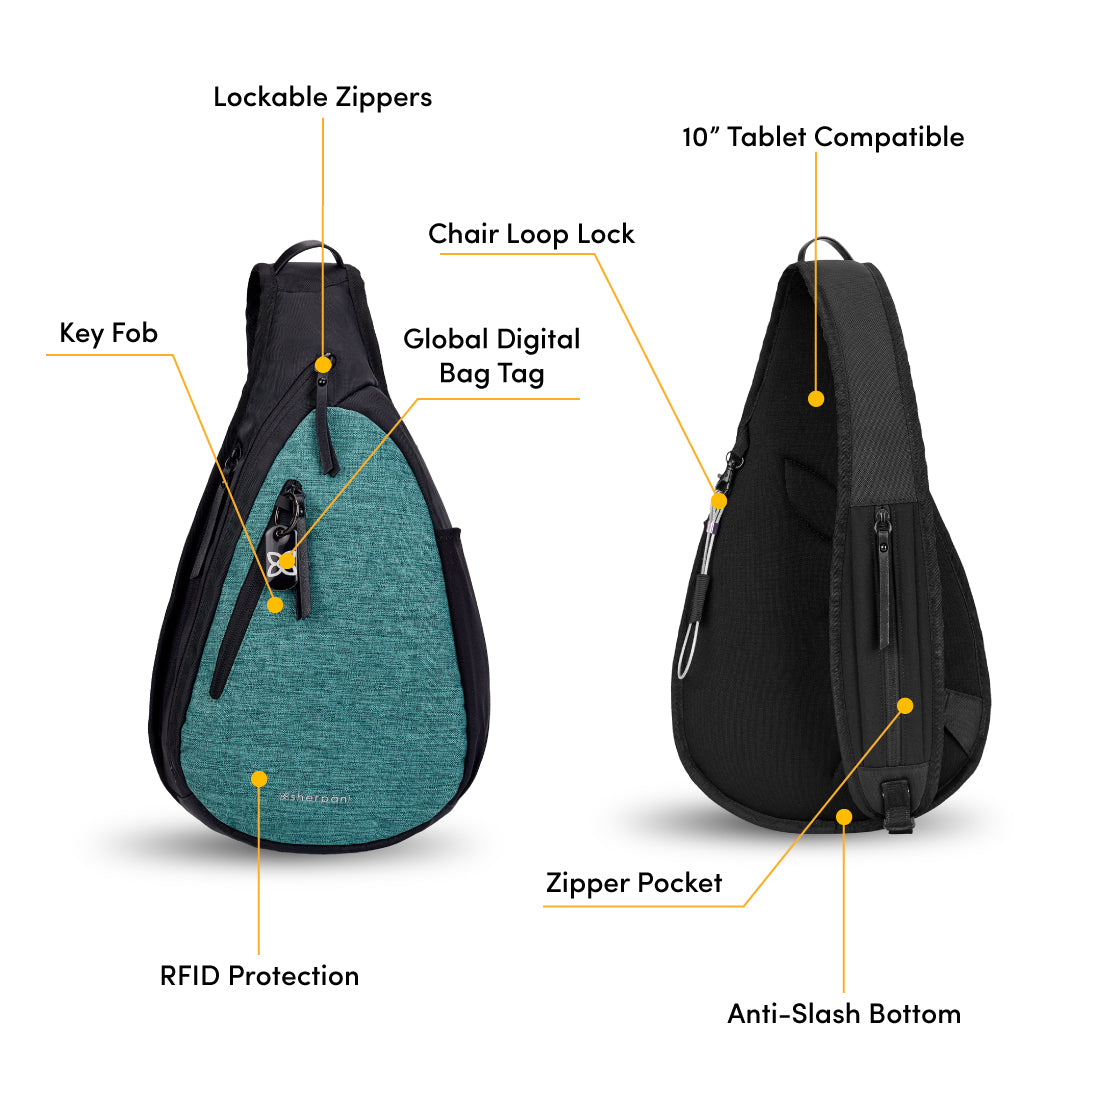 Graphic showcasing the features of Sherpani’s Anti Theft bag, the Esprit AT in Teal. There is a front and a back view of the bag, red circles highlight the following features: Lockable Zippers, Key Fob, Chair Loop Lock, 1” Tablet Compatible, Zipper Pocket, Anti-Slash Bottom, RFID Protection. 